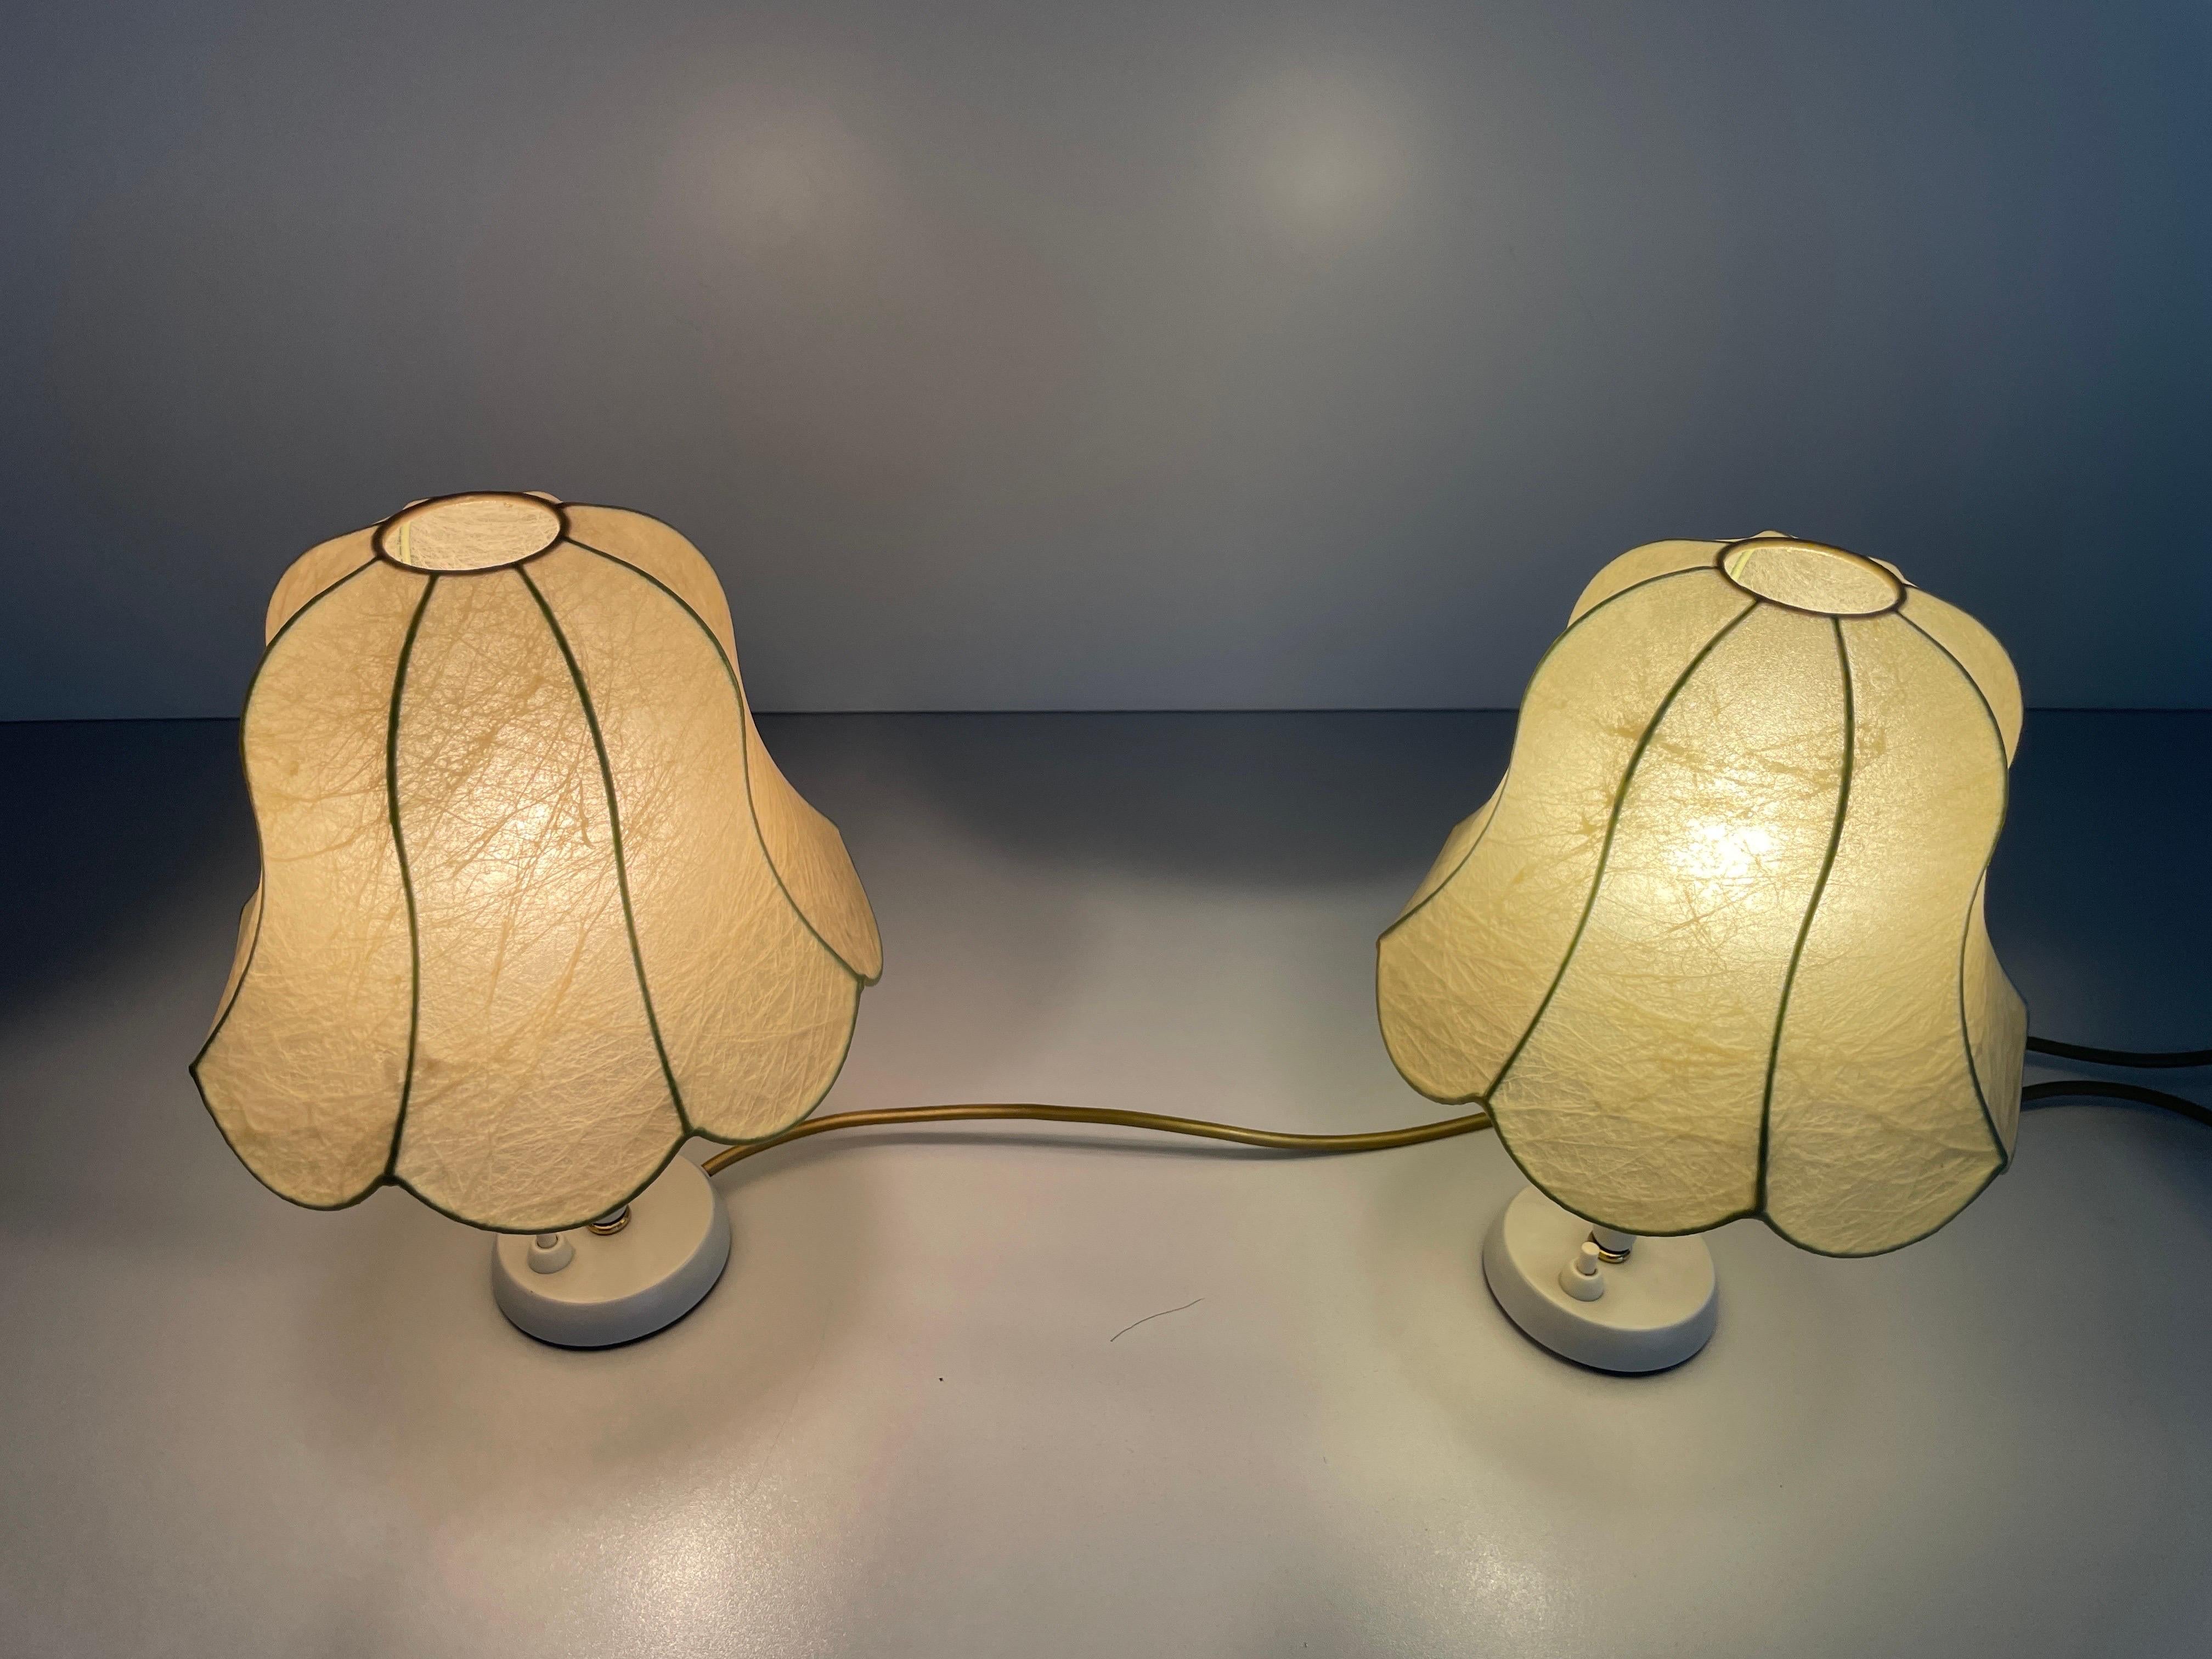 Cocoon Shade Metal Body Pair of Bedside Lamps by GOLDKANT, 1970s, Germany For Sale 8